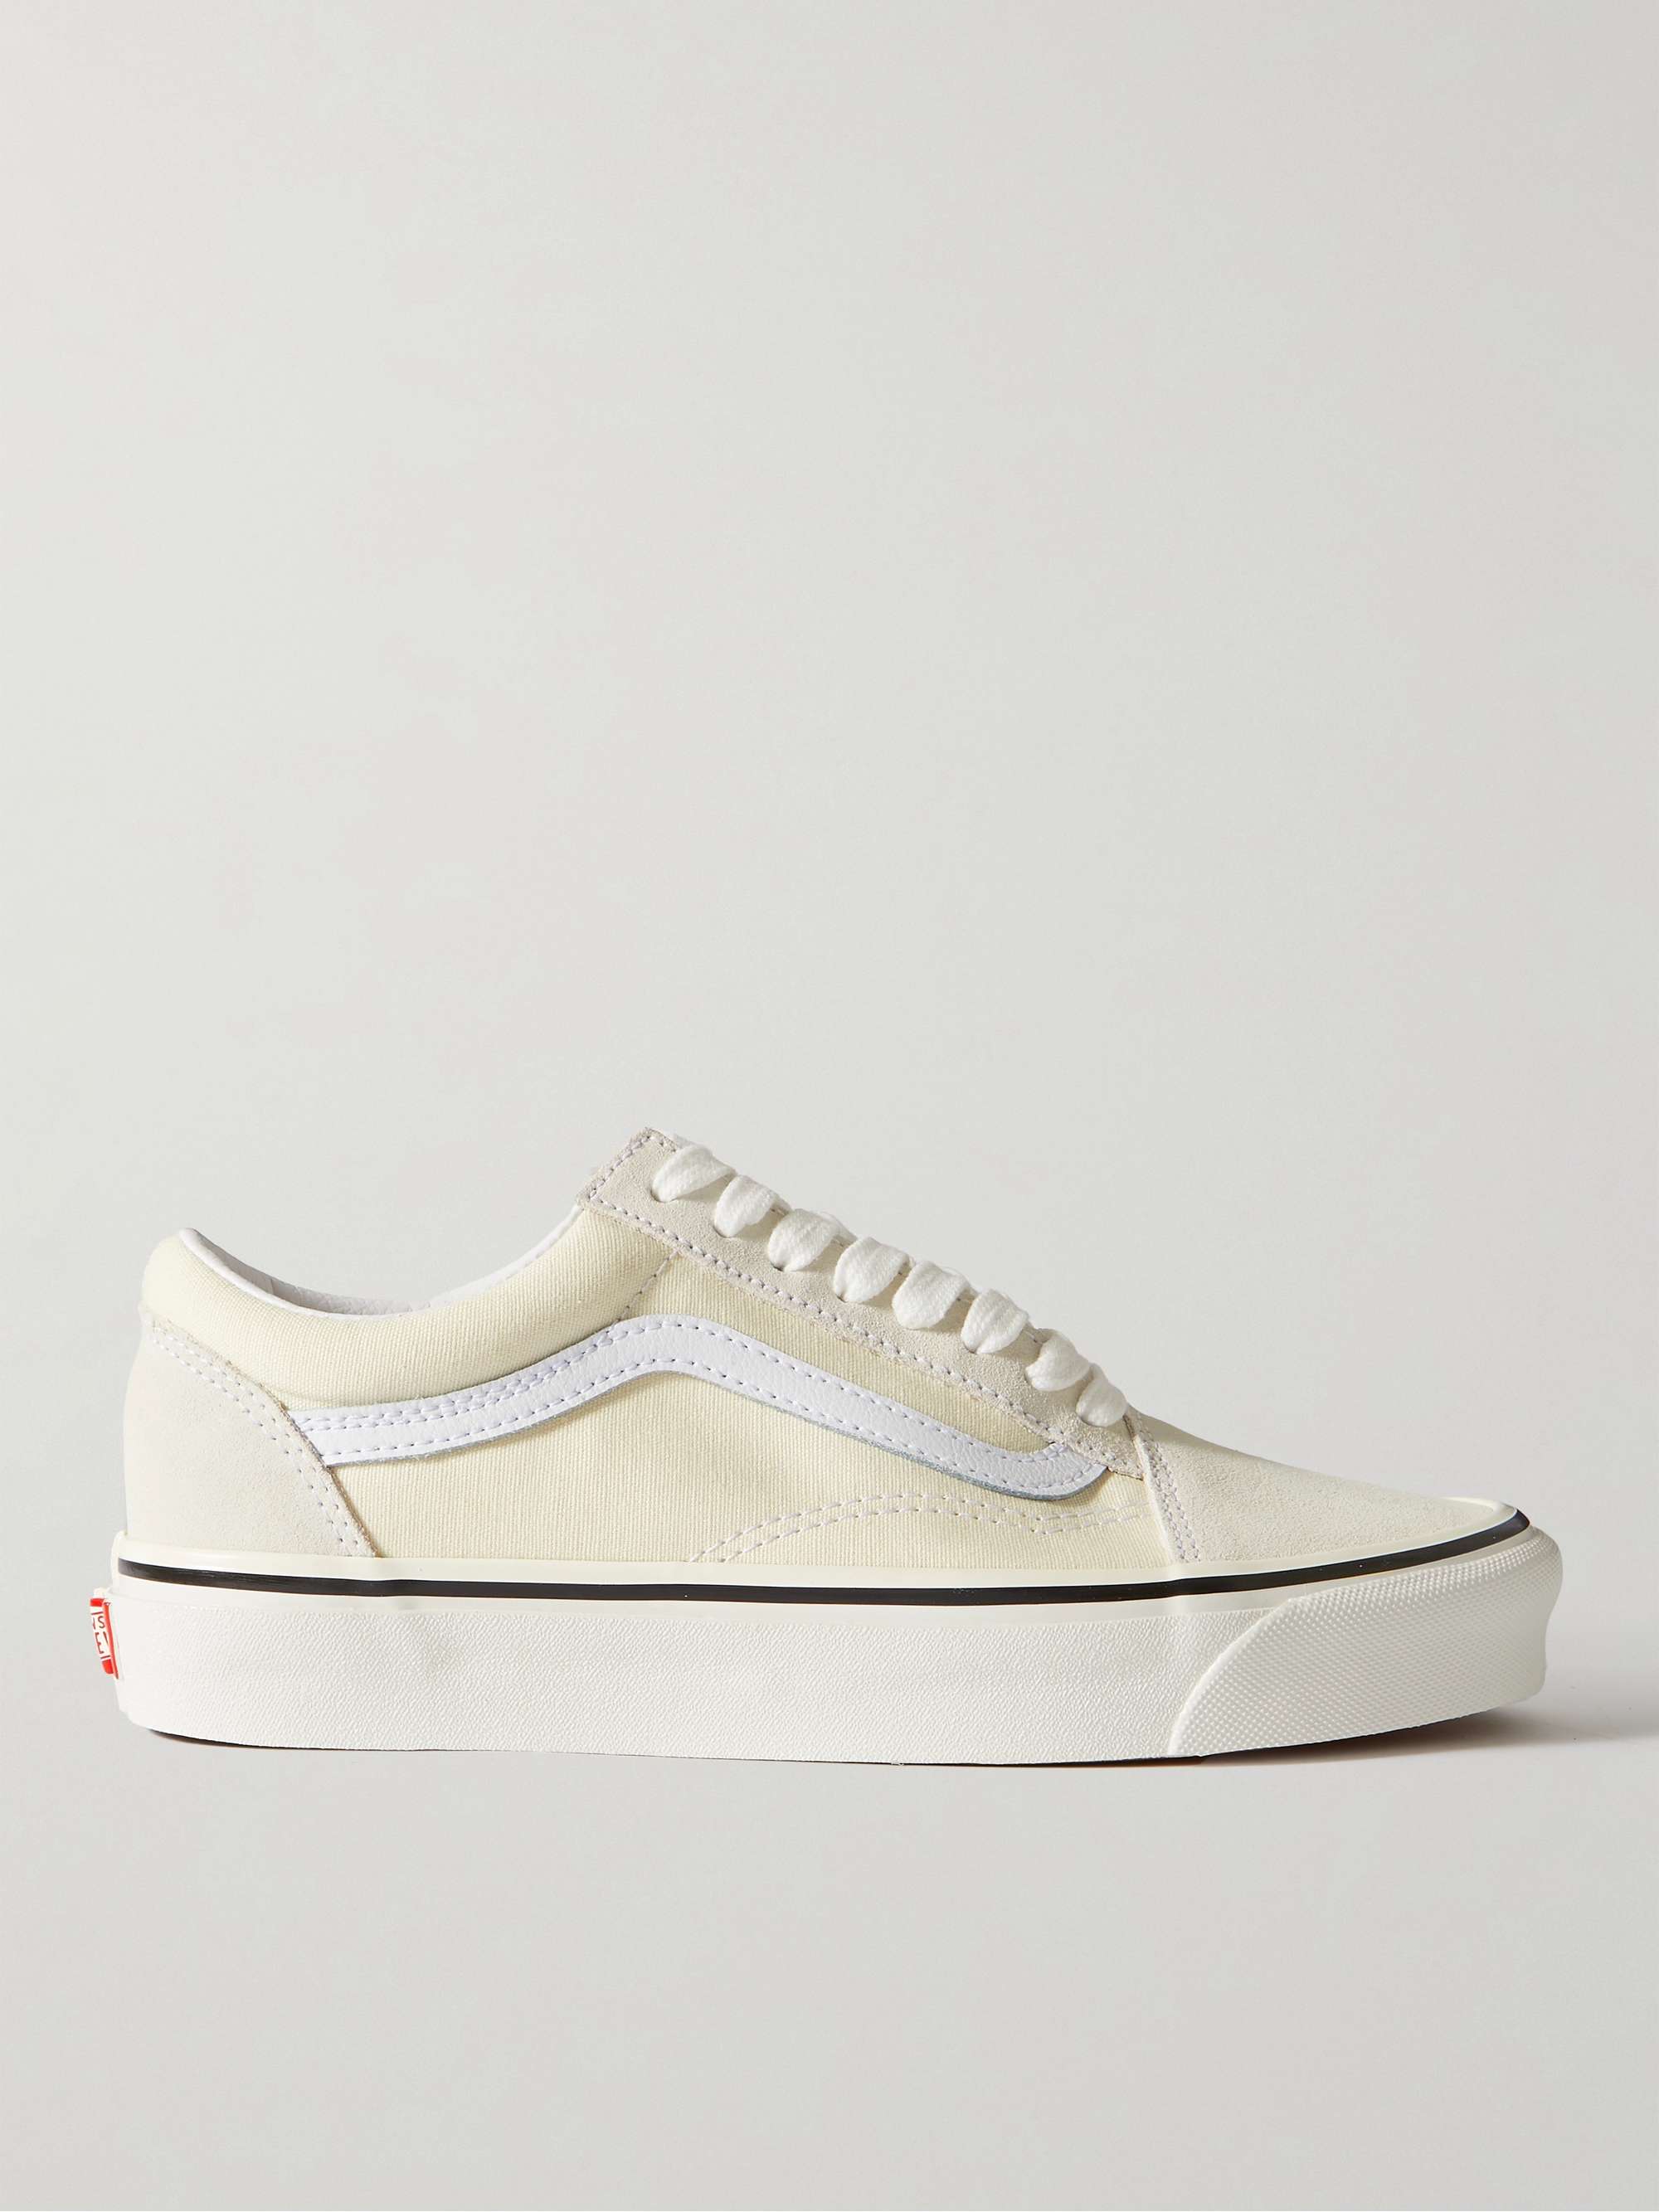 VANS Old Skool 36 DX Leather-Trimmed Canvas and Suede Sneakers | MR PORTER